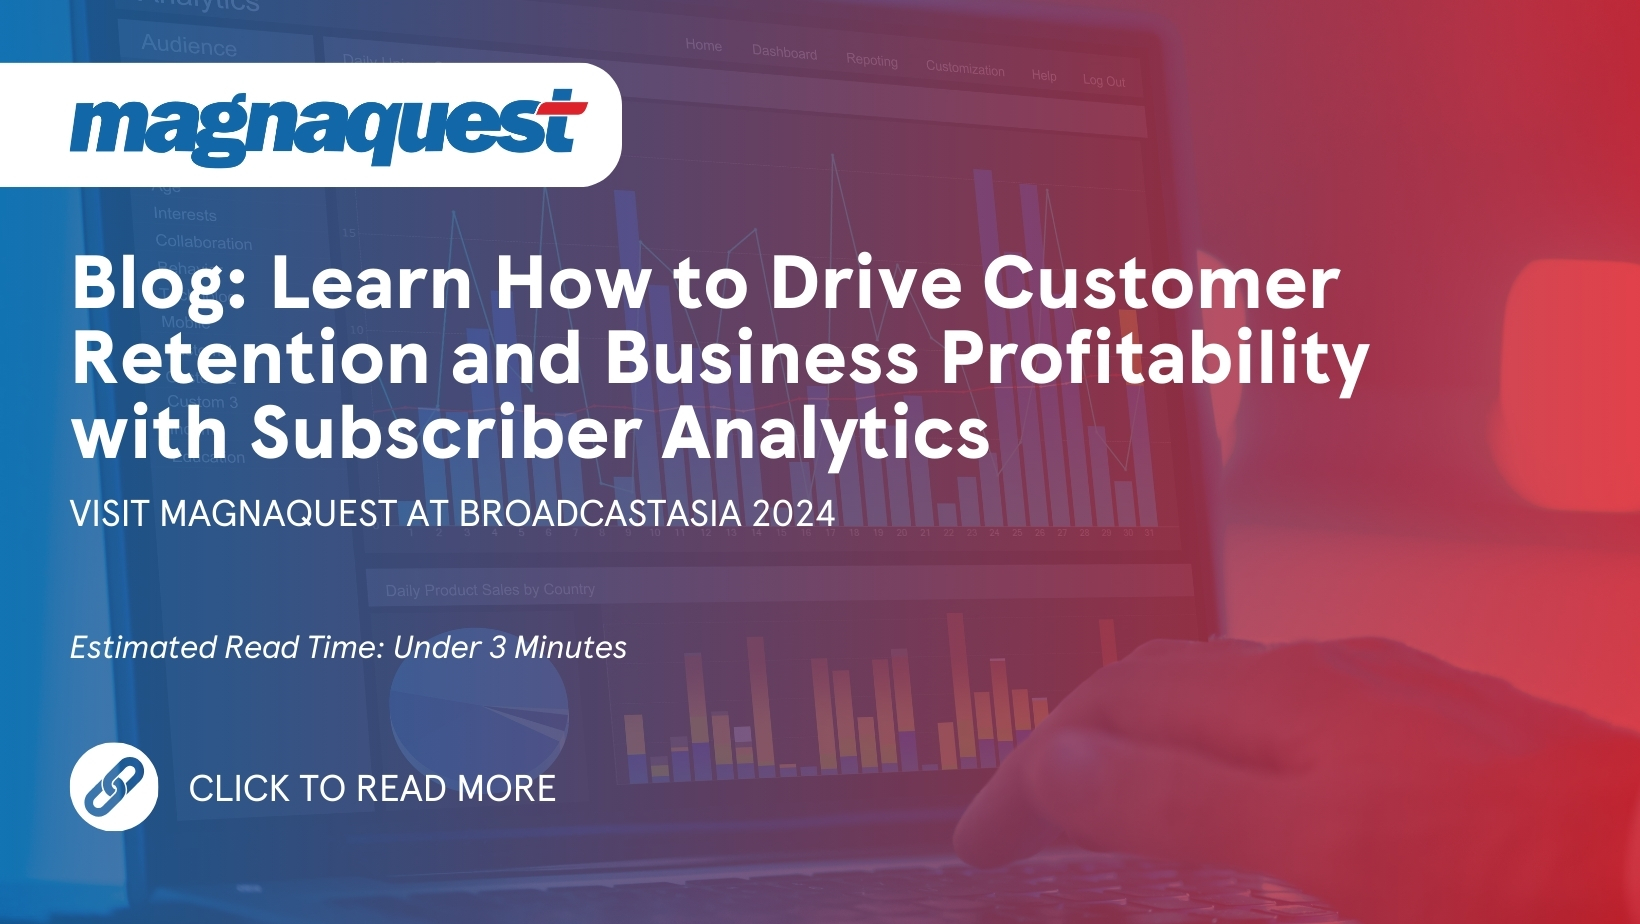 http://magnaquest.com/wp-content/uploads/2024/05/WB-Learn-How-to-Drive-Customer-Retention-and-Business-Profitability-with-Subscriber-Analytics.jpg